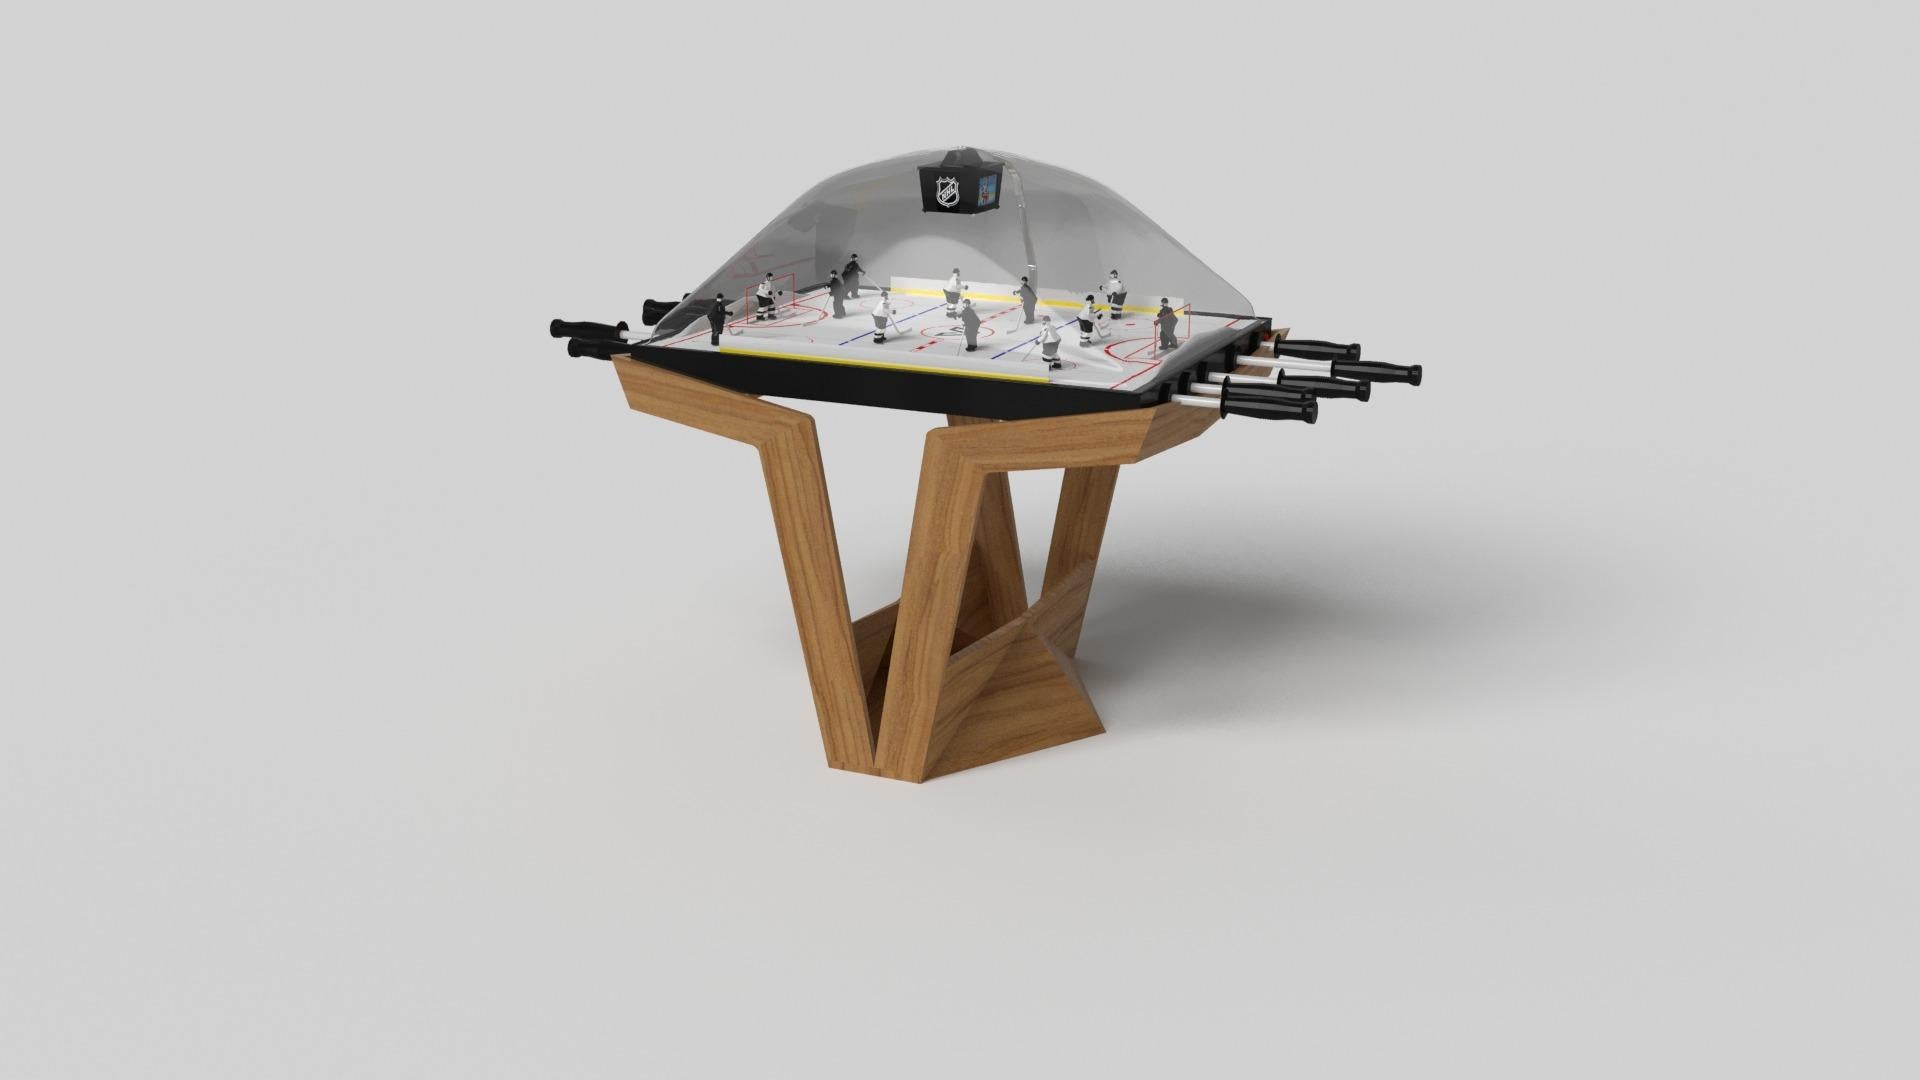 The Enzo dome hockey table is Inspired by the aerodynamic angles of top-of-the-line European vehicles. Designed with sleek, V-shaped lines and a thoughtful use of negative space, this table boasts an energetic sense of spirit while epitomizing the